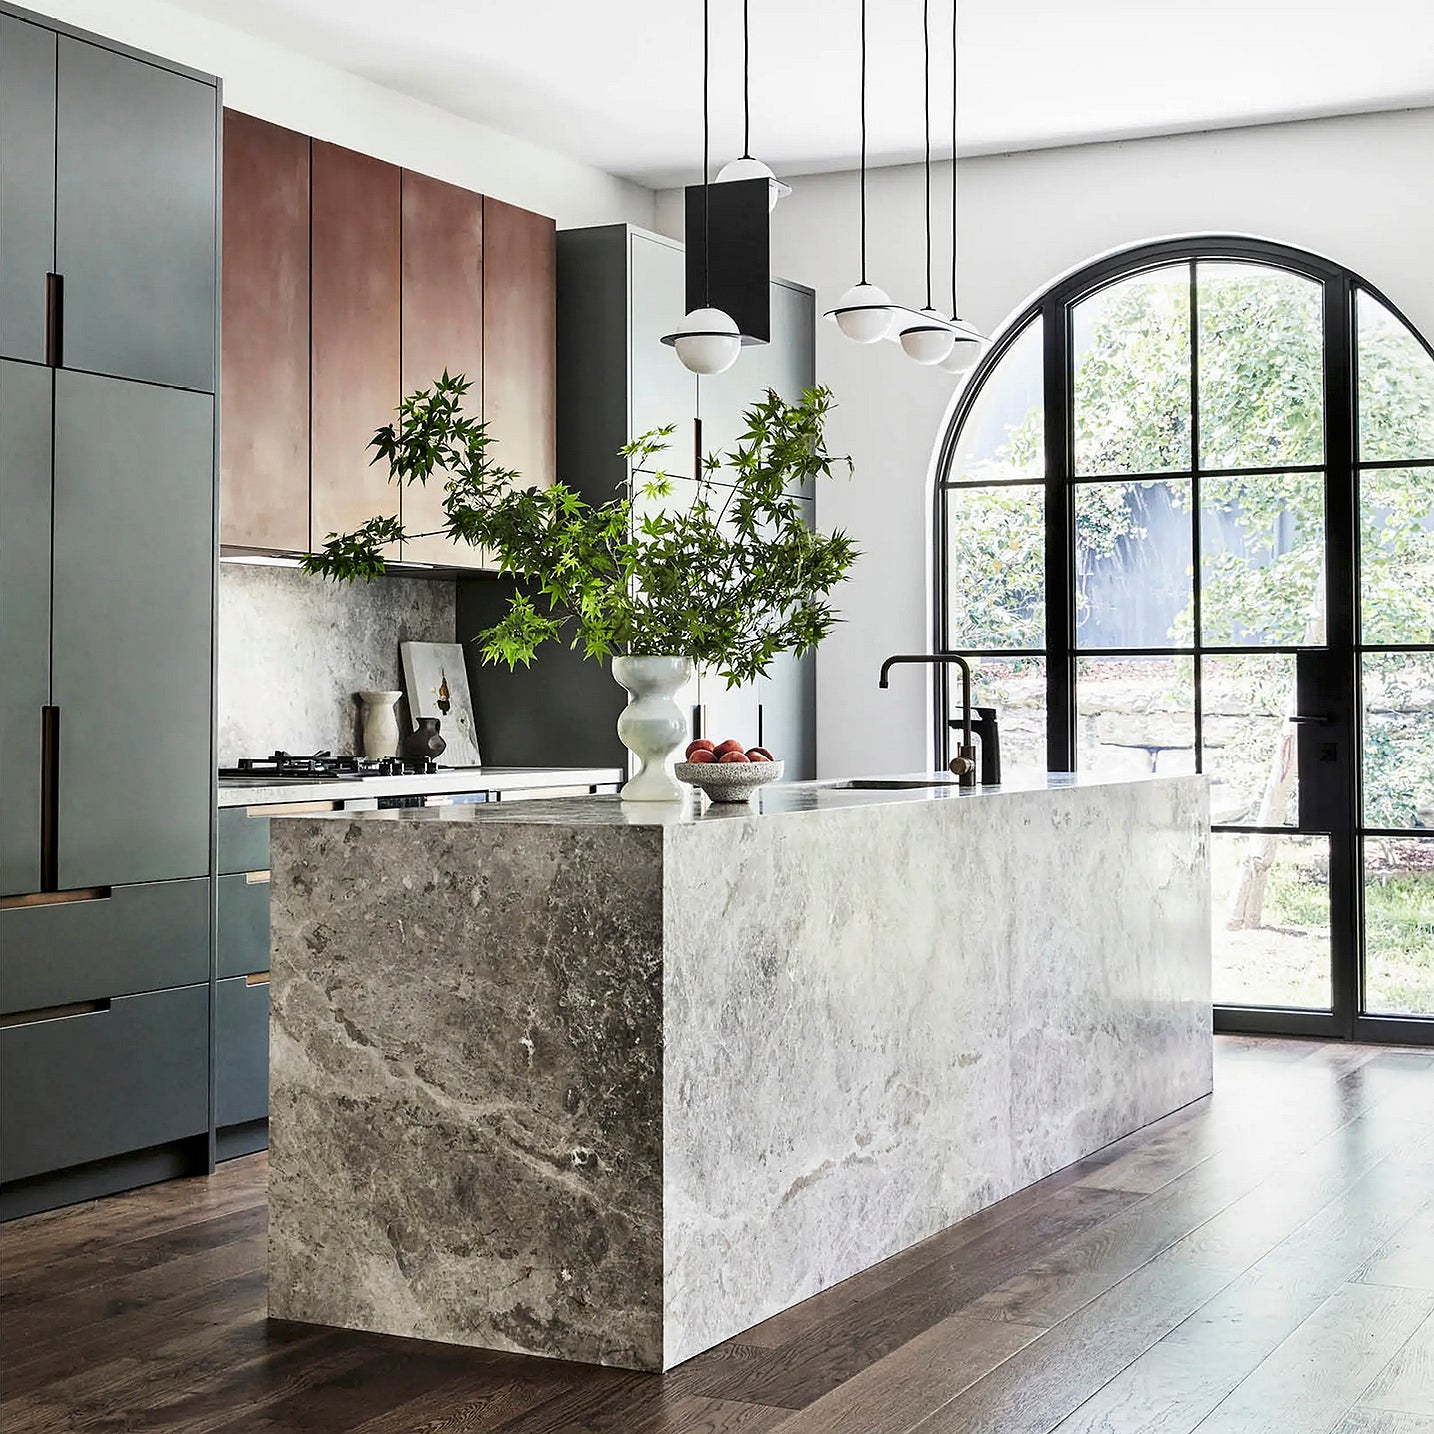 Safari Journal / Blog by Safari Fusion | Pros & Cons of Marble Benchtops by Shear & Wood | Lower North Shore House by Amanda Barnett Design | Image via The Design Files